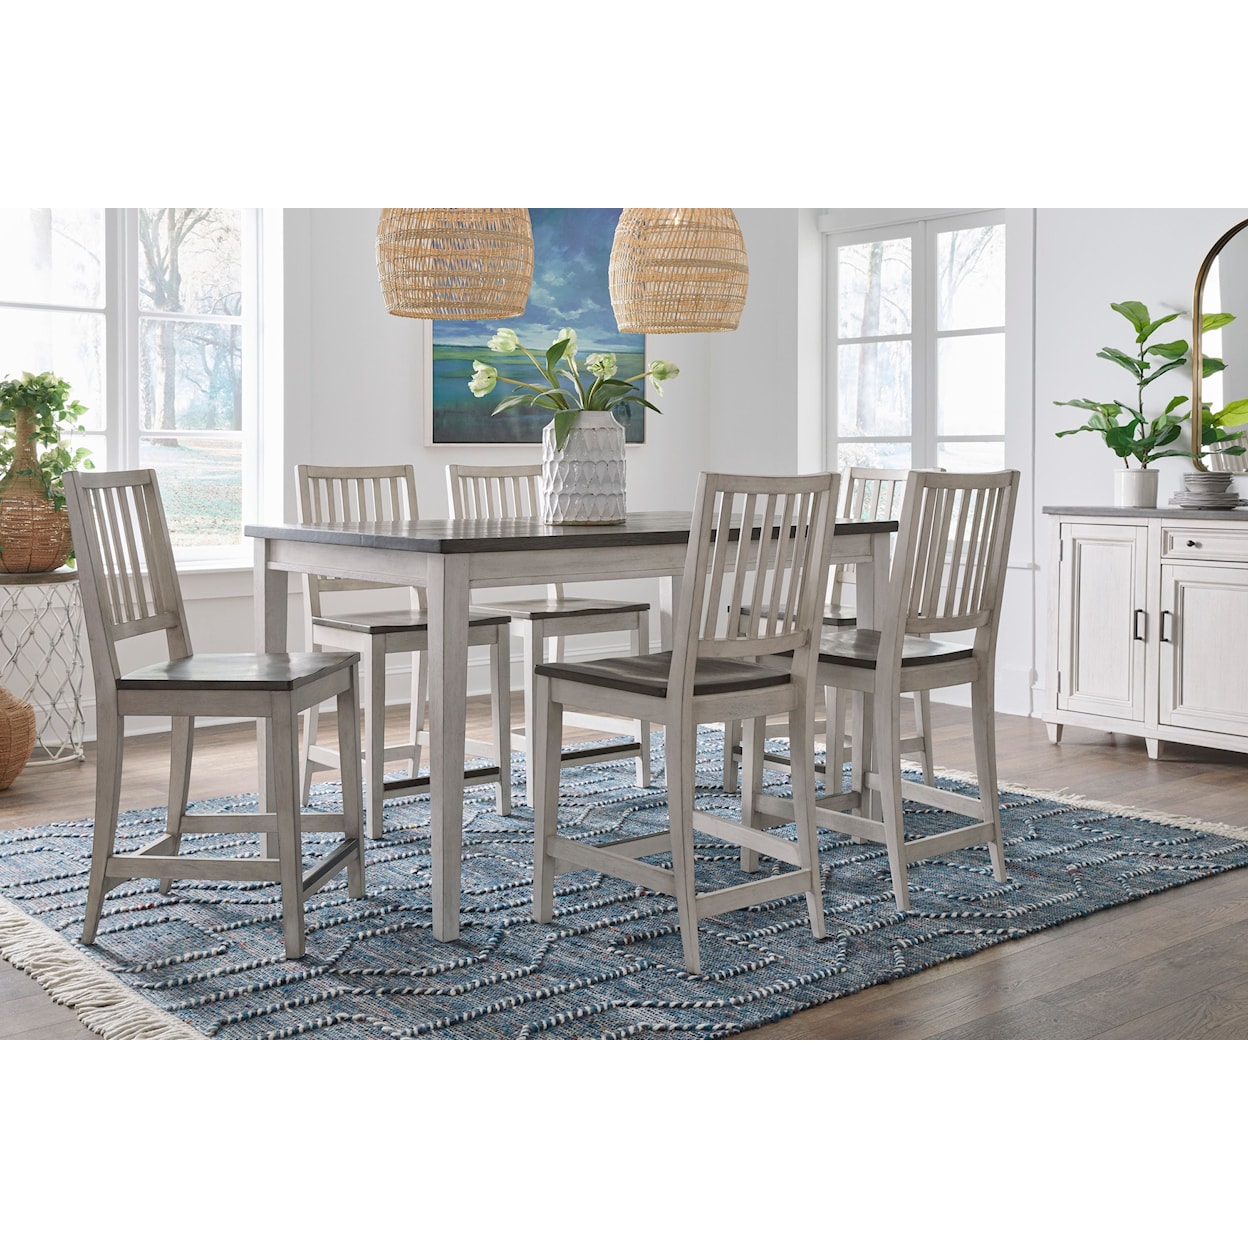 Aspenhome Caraway Counter Height Dining Chair